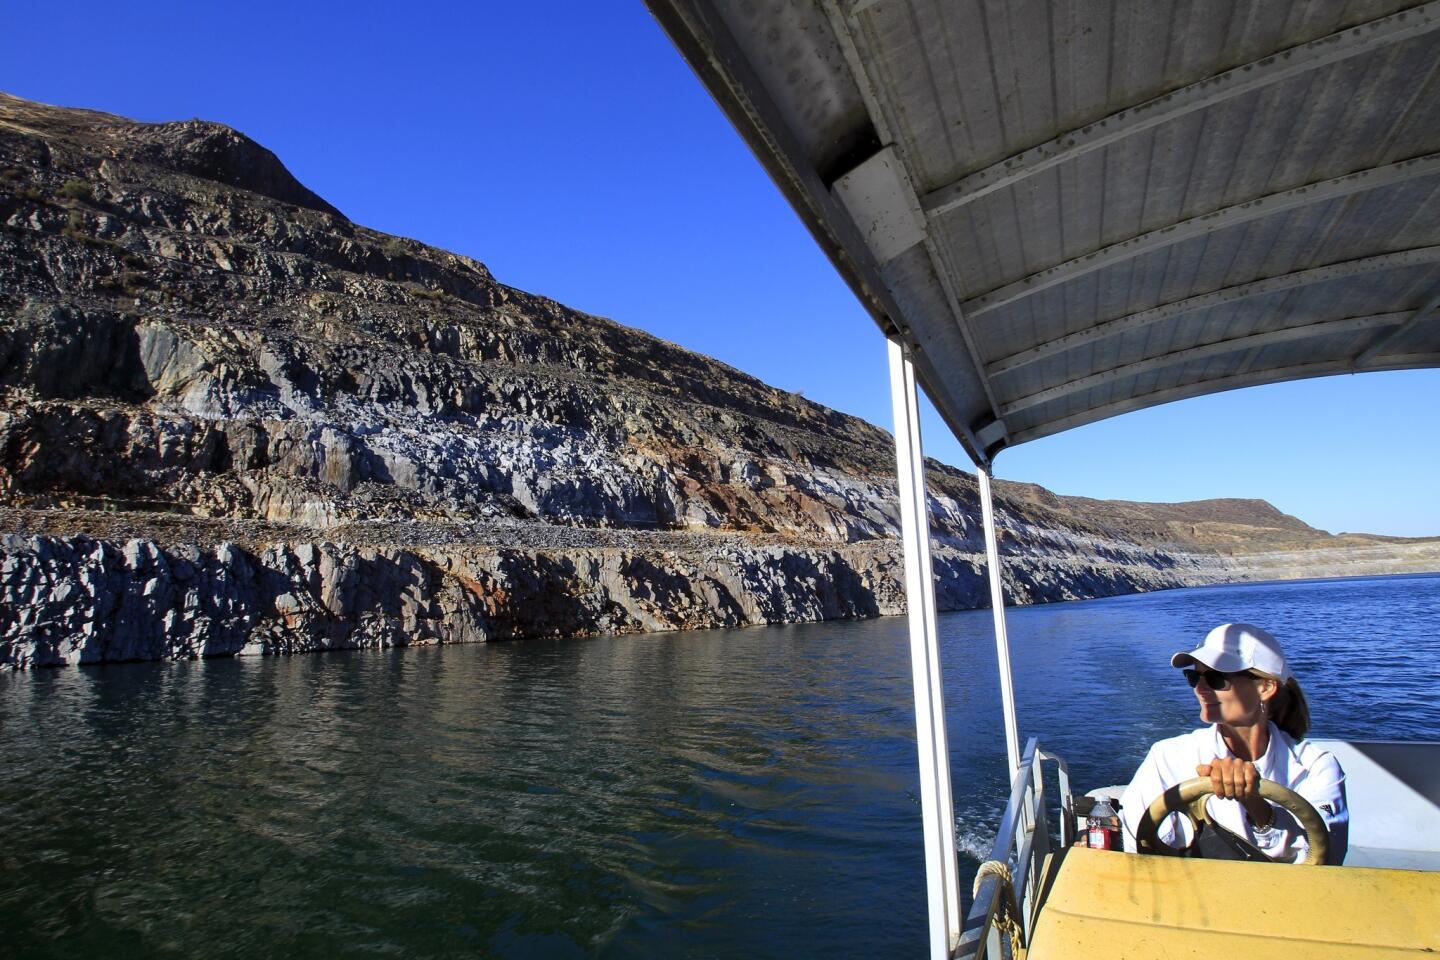 Sheri Shaffer, a manager with the Metropolitan Water District of Southern California, drives a boat past dry, rocky banks that reveal how far the water in Diamond Valley Lake in Hemet has receded. A group of scientists ran the state through a virtual mega-drought to see how it would fare.